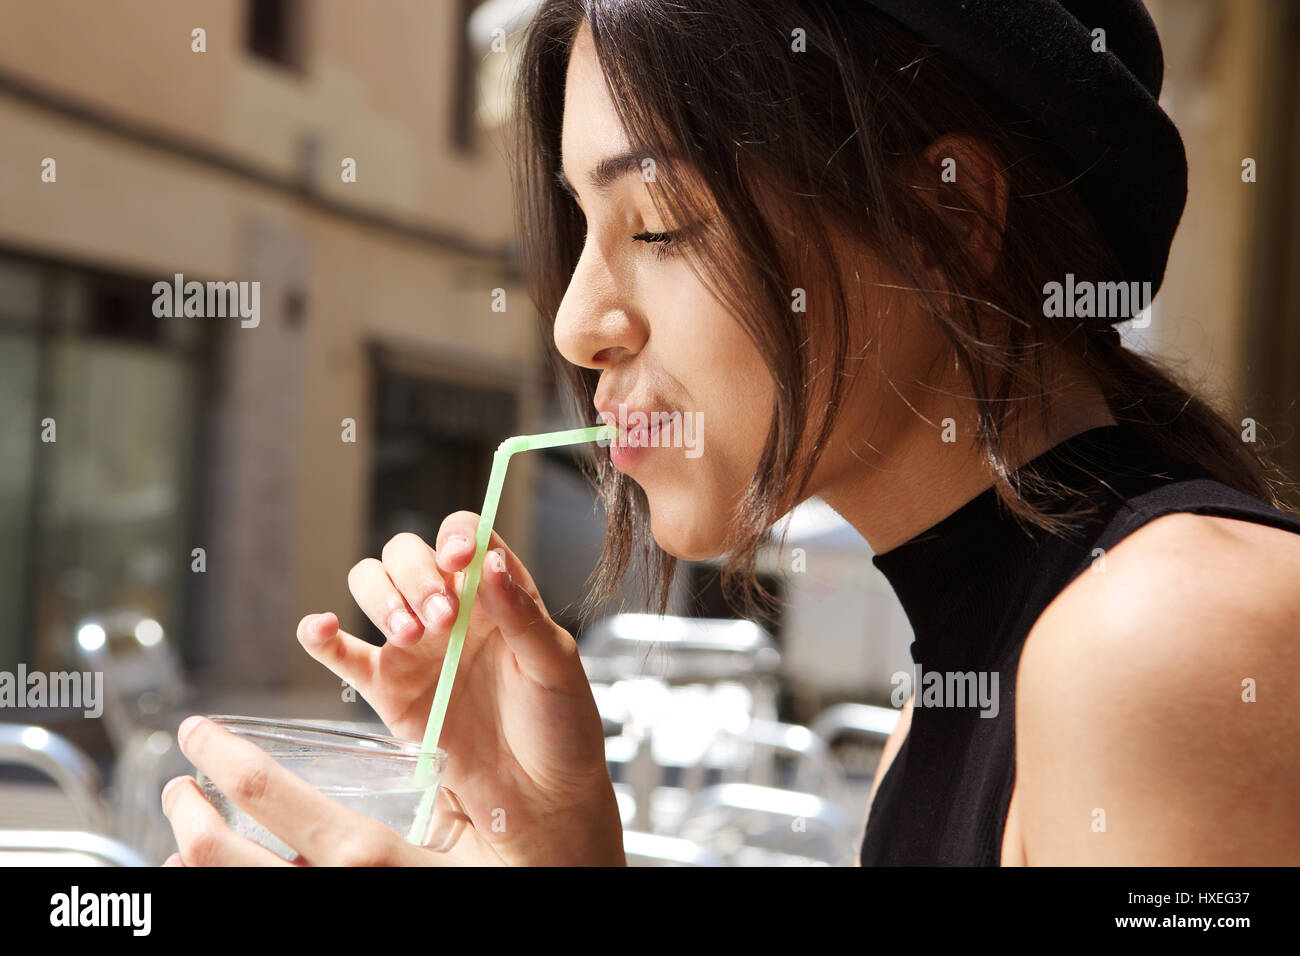 Close up side portrait of a young woman drinking with straw at outdoor cafe Stock Photo